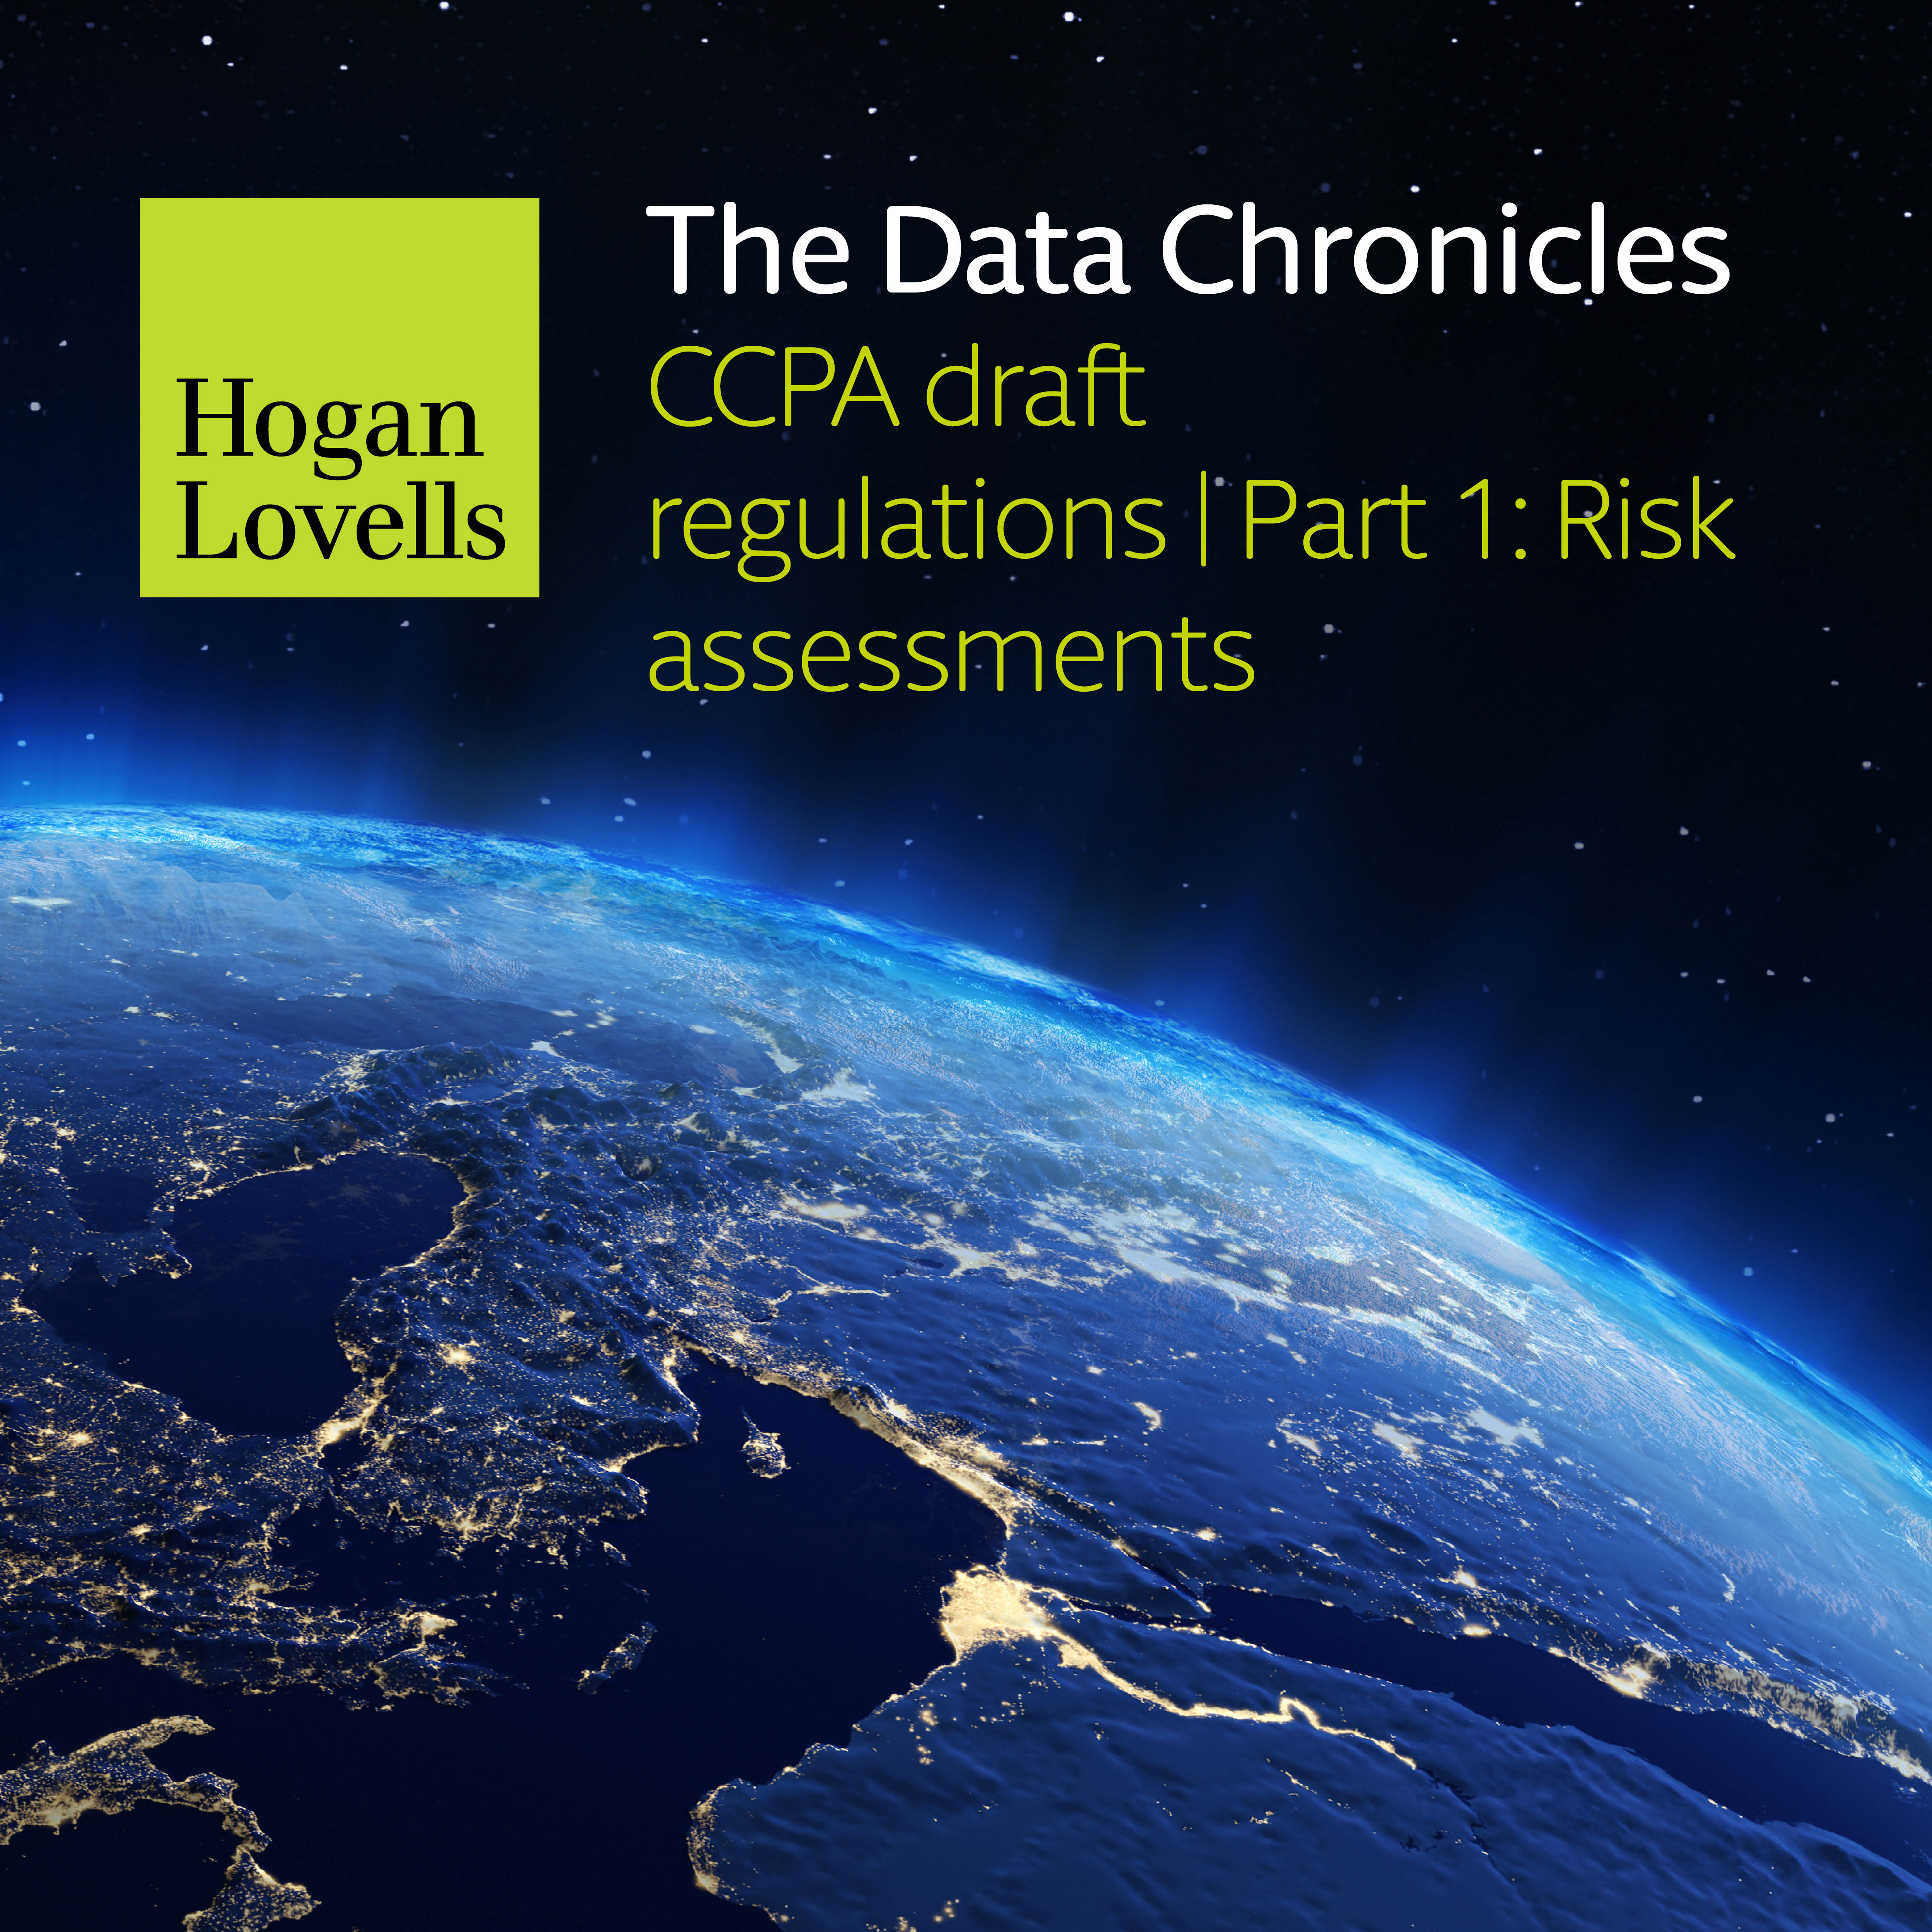 The Data Chronicles_CCPA part 1